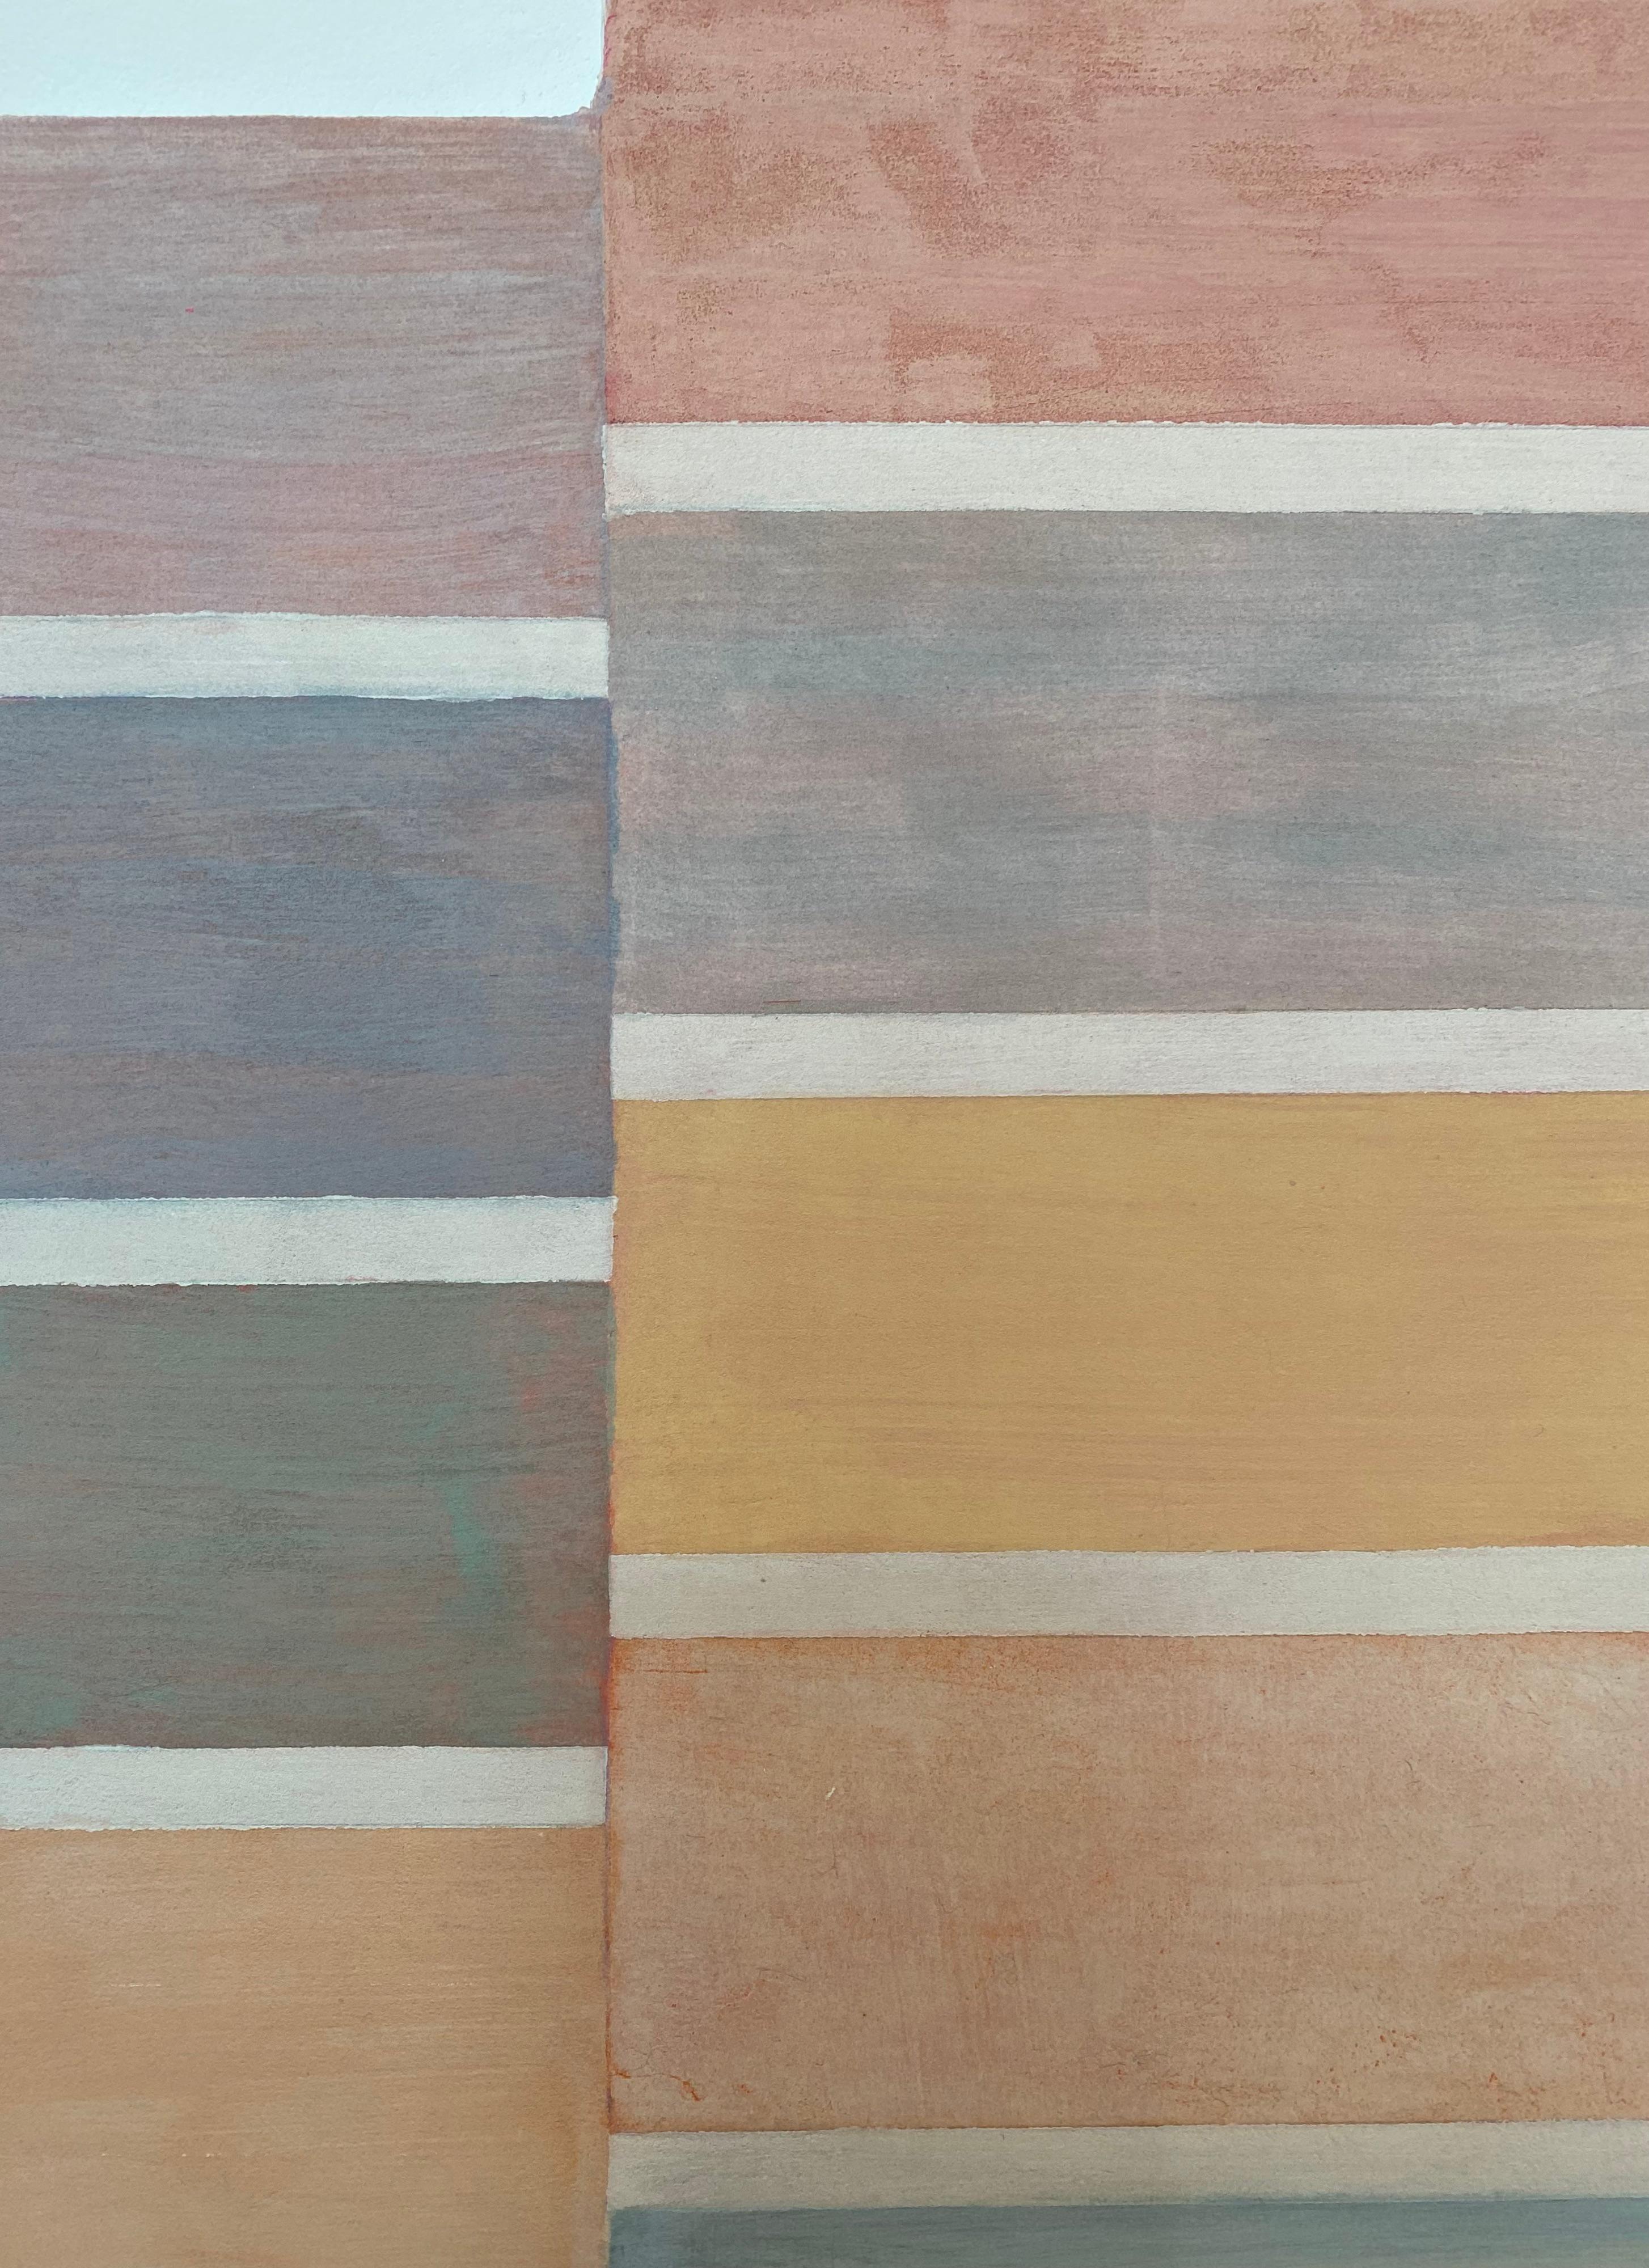 C30, Peach, Mauve, Pink, Dusty Rose Beige Stripes, Pastel Color on Shaped Panel - Contemporary Painting by Elizabeth Gourlay